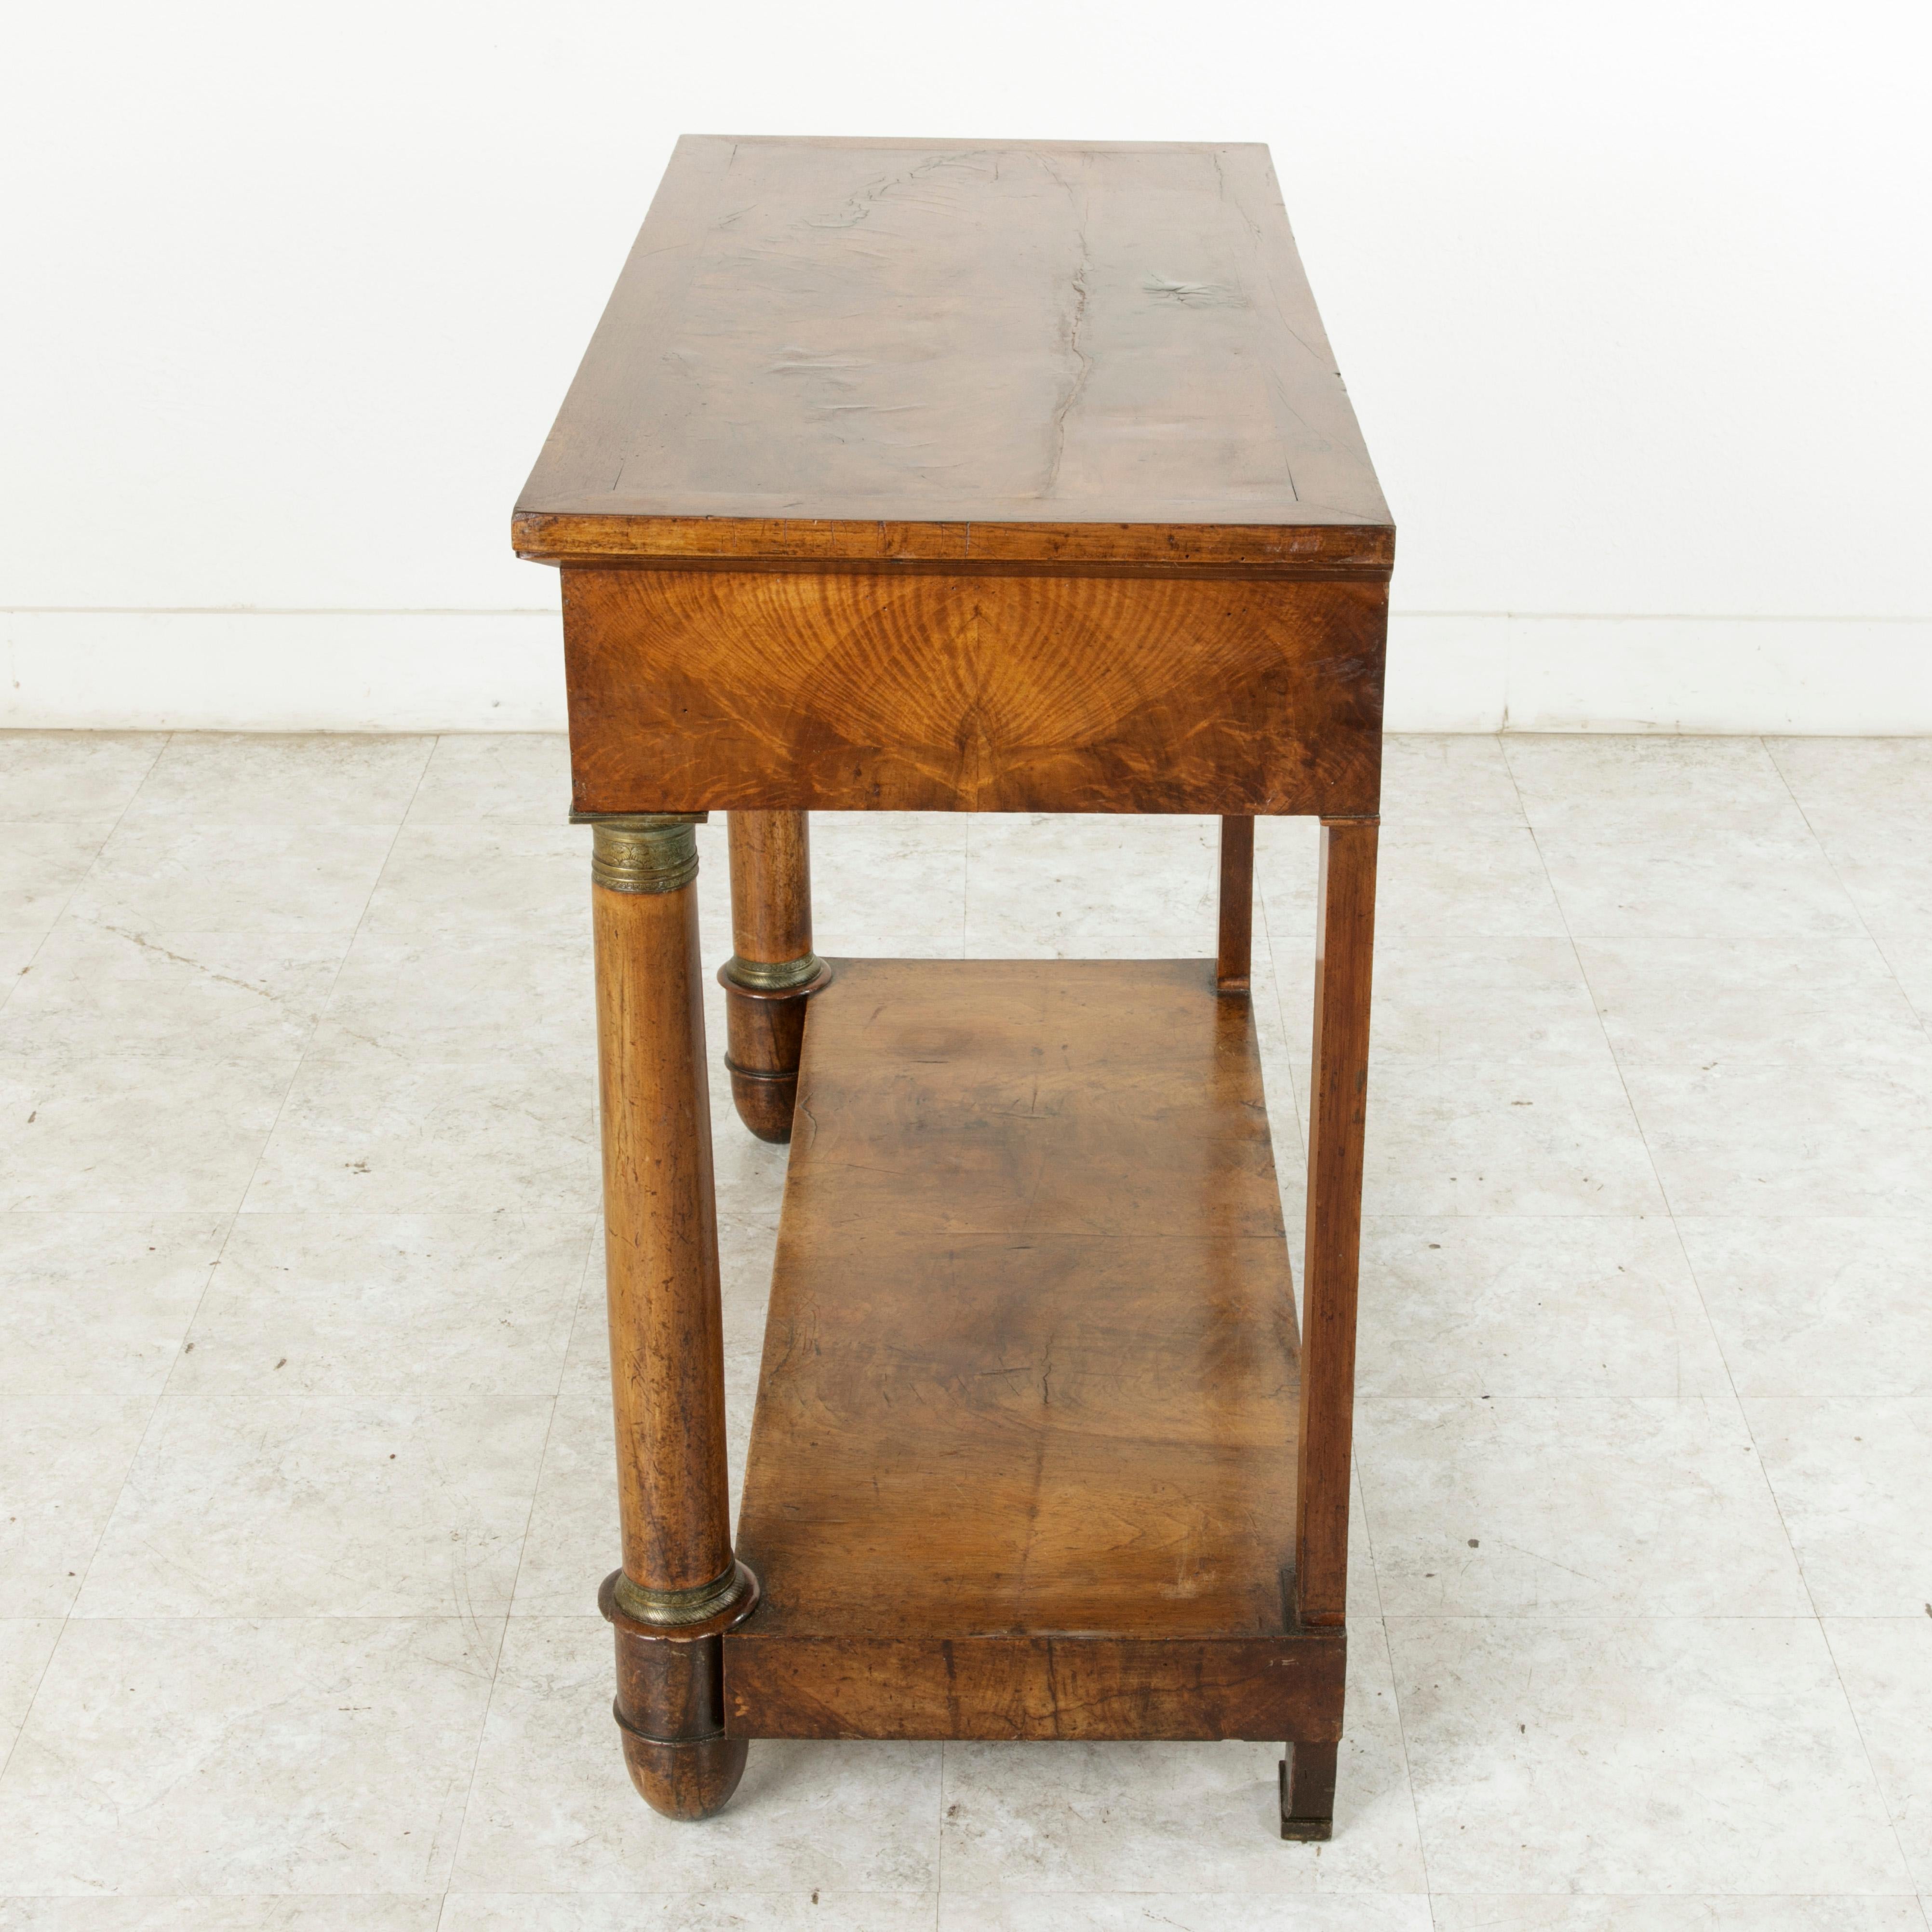 Early 19th Century, French Empire Period Burl Walnut Console Table with Drawer 2